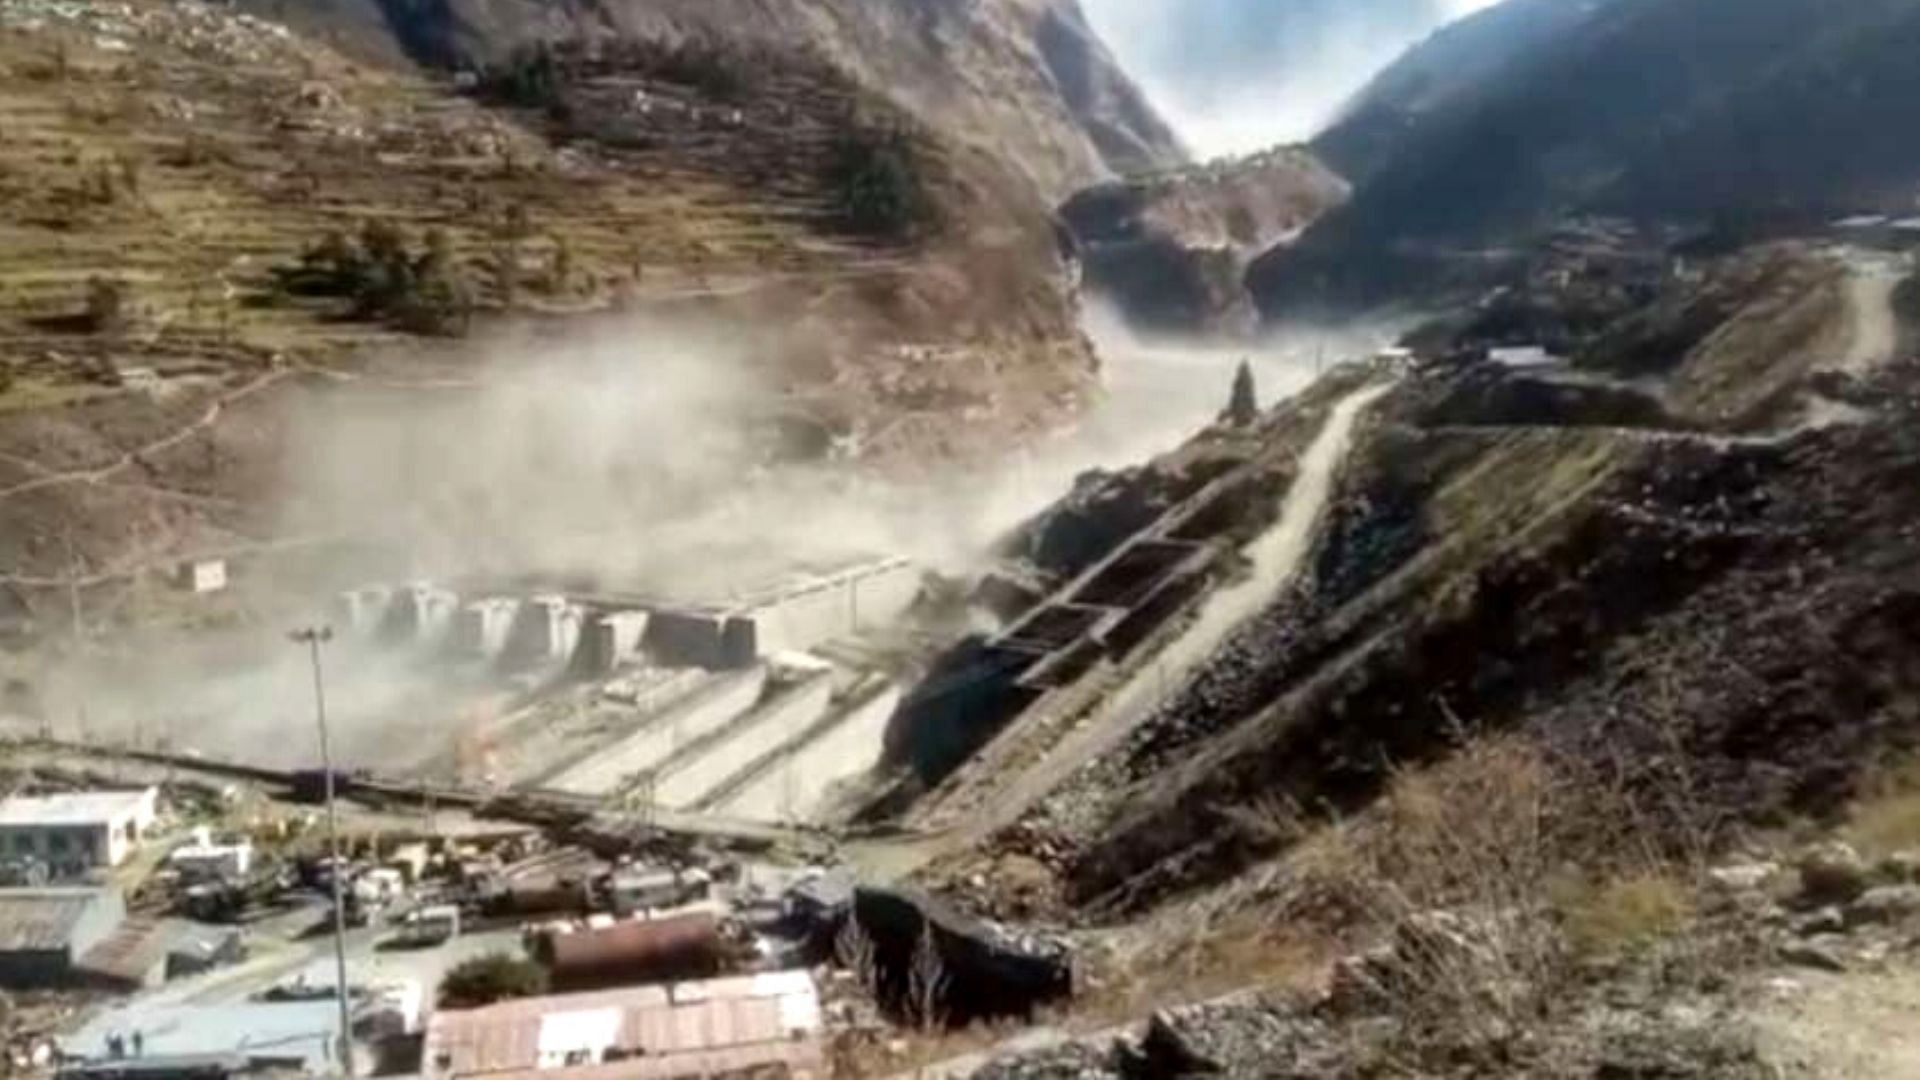 Catch all live updates of the Uttarakhand glacier disaster here.